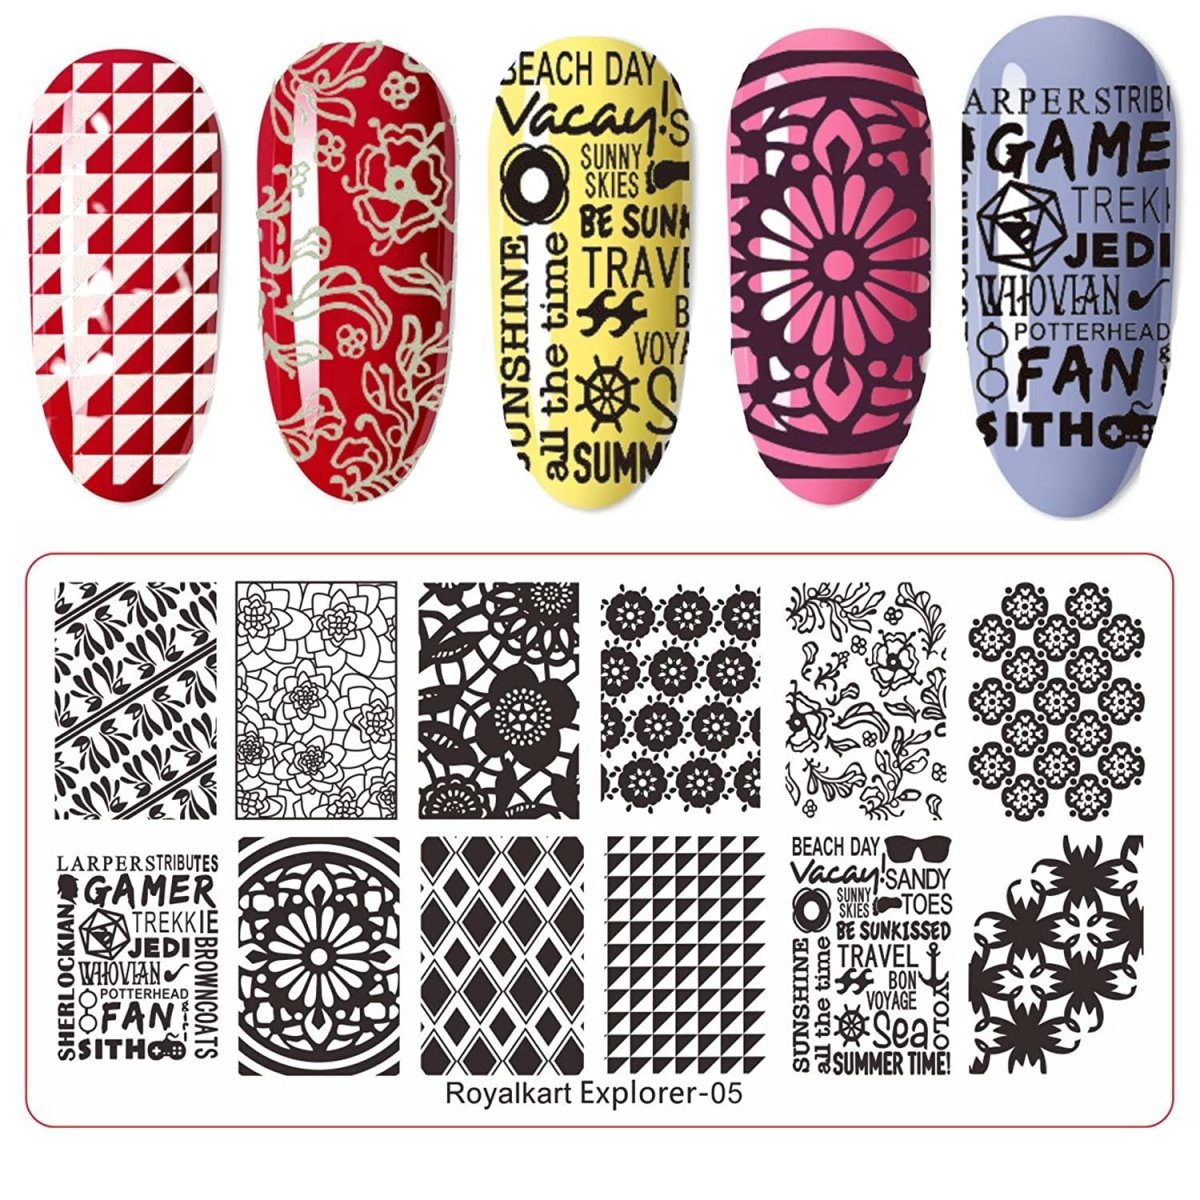 D.B.Z.® Nail Art Kit - 48 Pcs Glass Bottles Glitter,100 Nails,5 Nail Tapes,  Stamping Plate, Stamper with Scrapper, Cuticle Wooden Sticks Buffer  Complete Nail Art Ki For Learners & Professional. : Amazon.in: Beauty